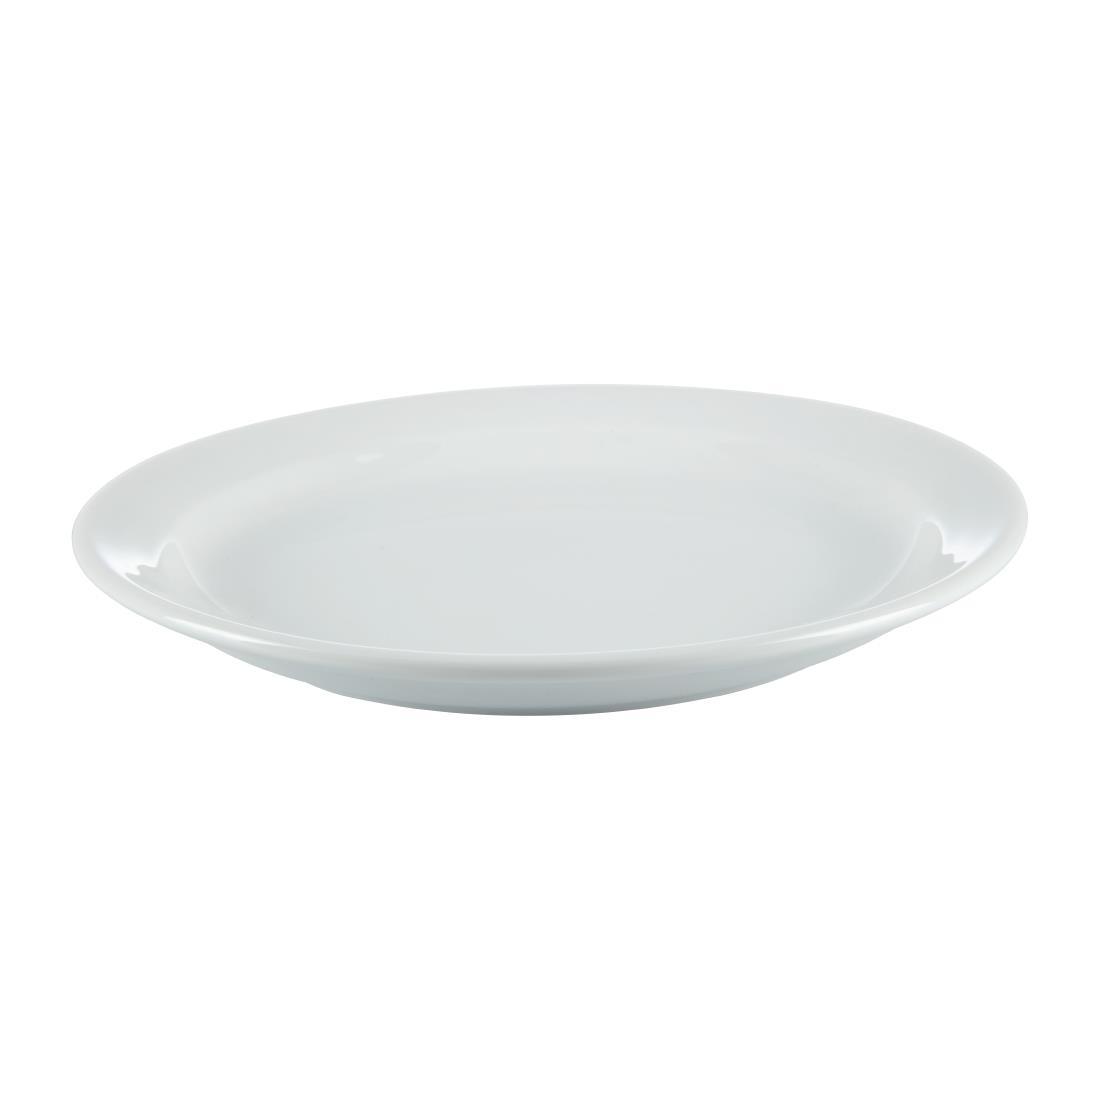 Olympia Whiteware Narrow Rimmed Plates 180mm (Pack of 12) - CB487  - 5